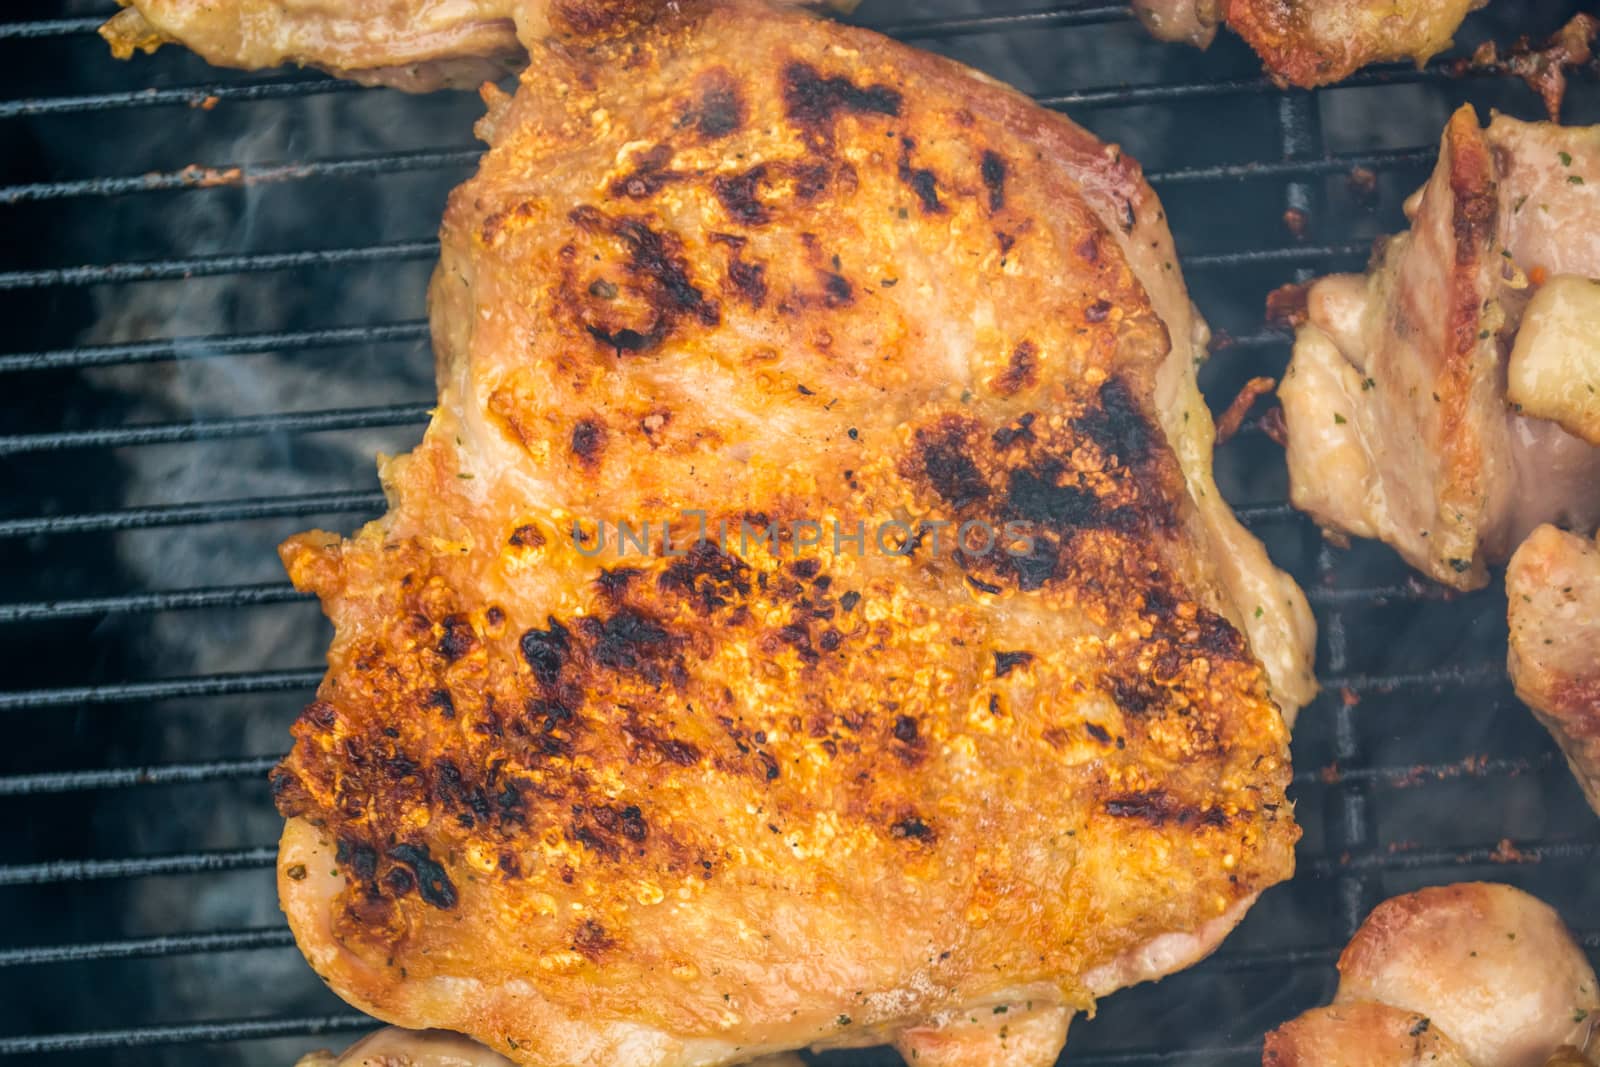 Closeup of grilled pork chop. Meat is still smoking on grill